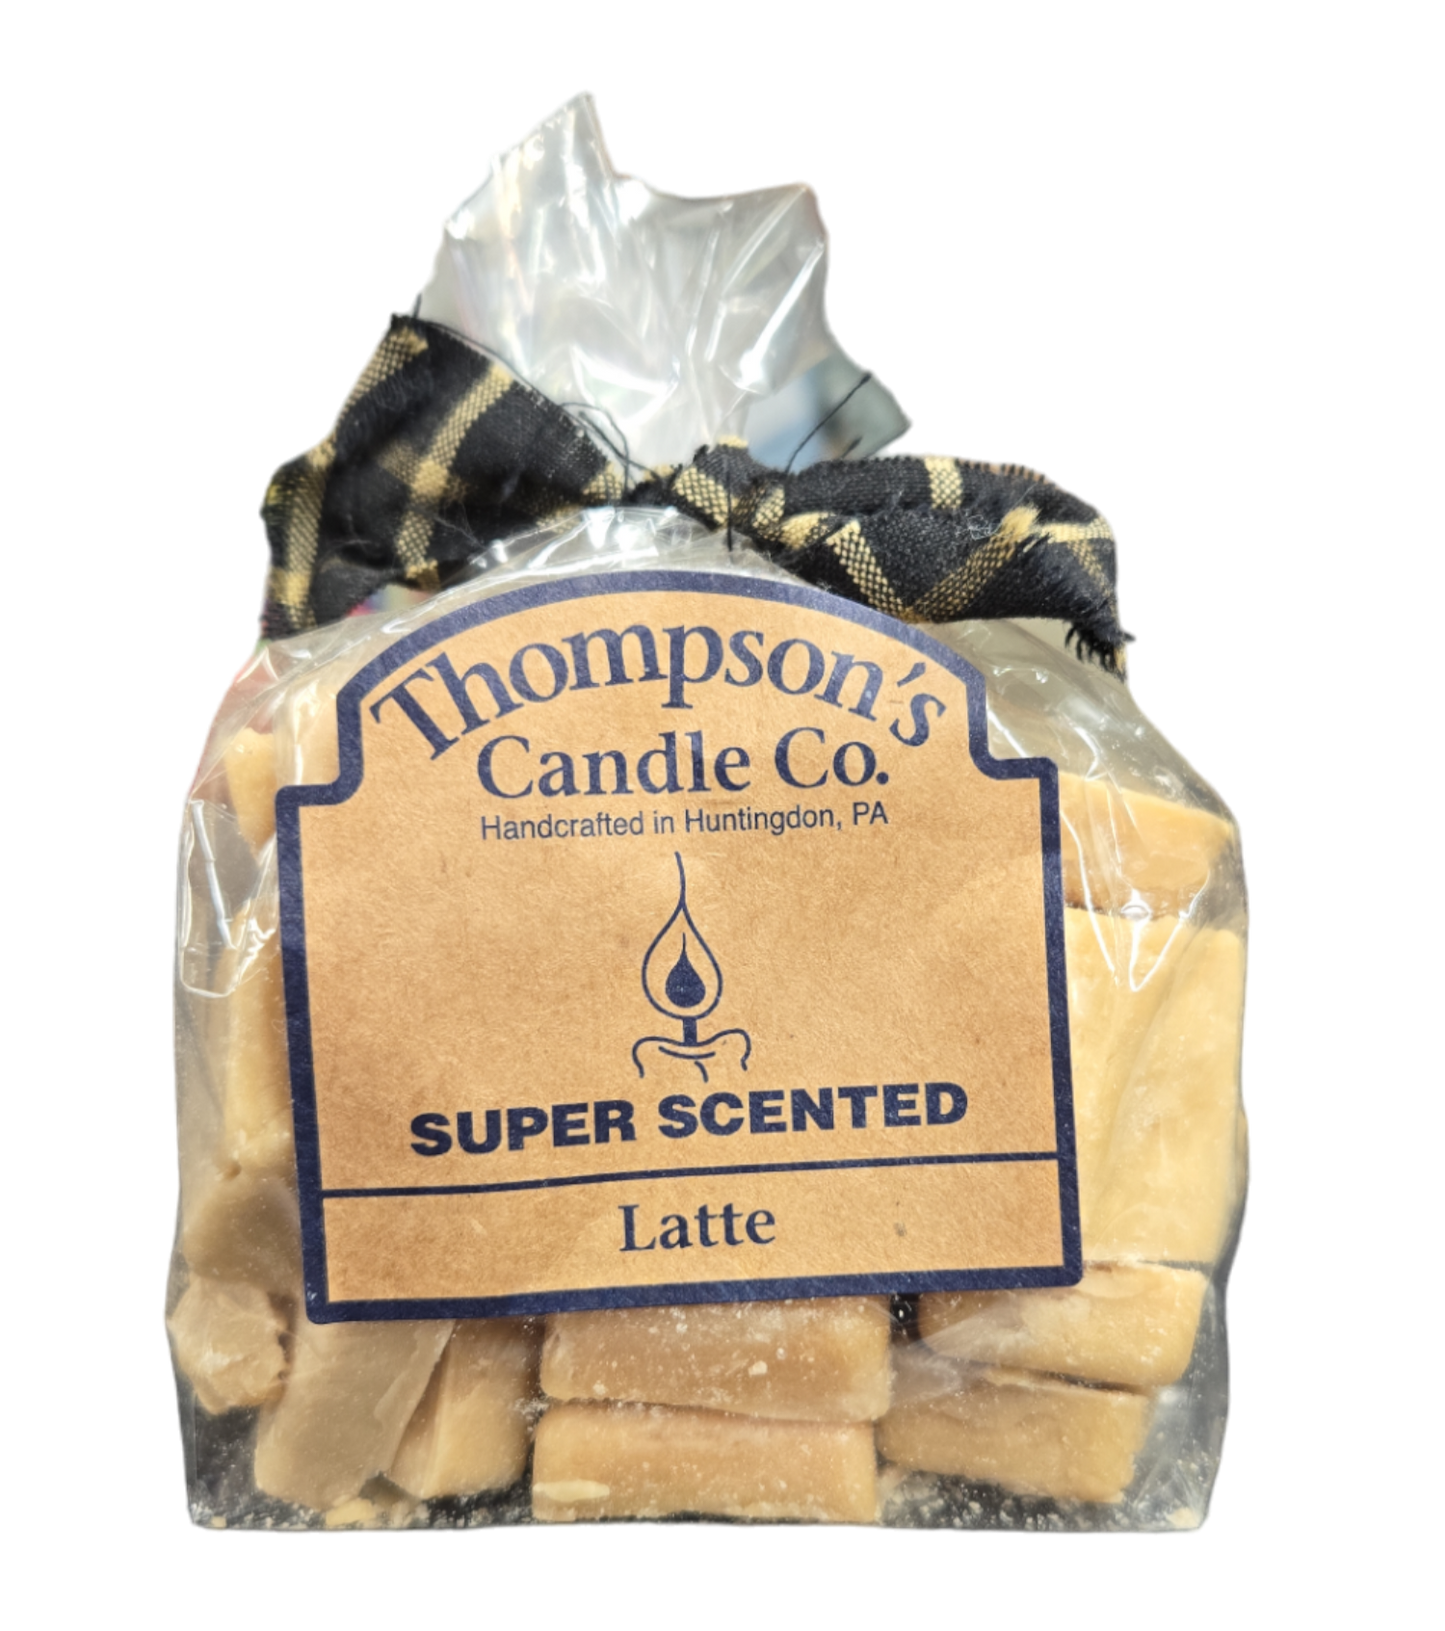 Thompson's Candle Co. Crumbles